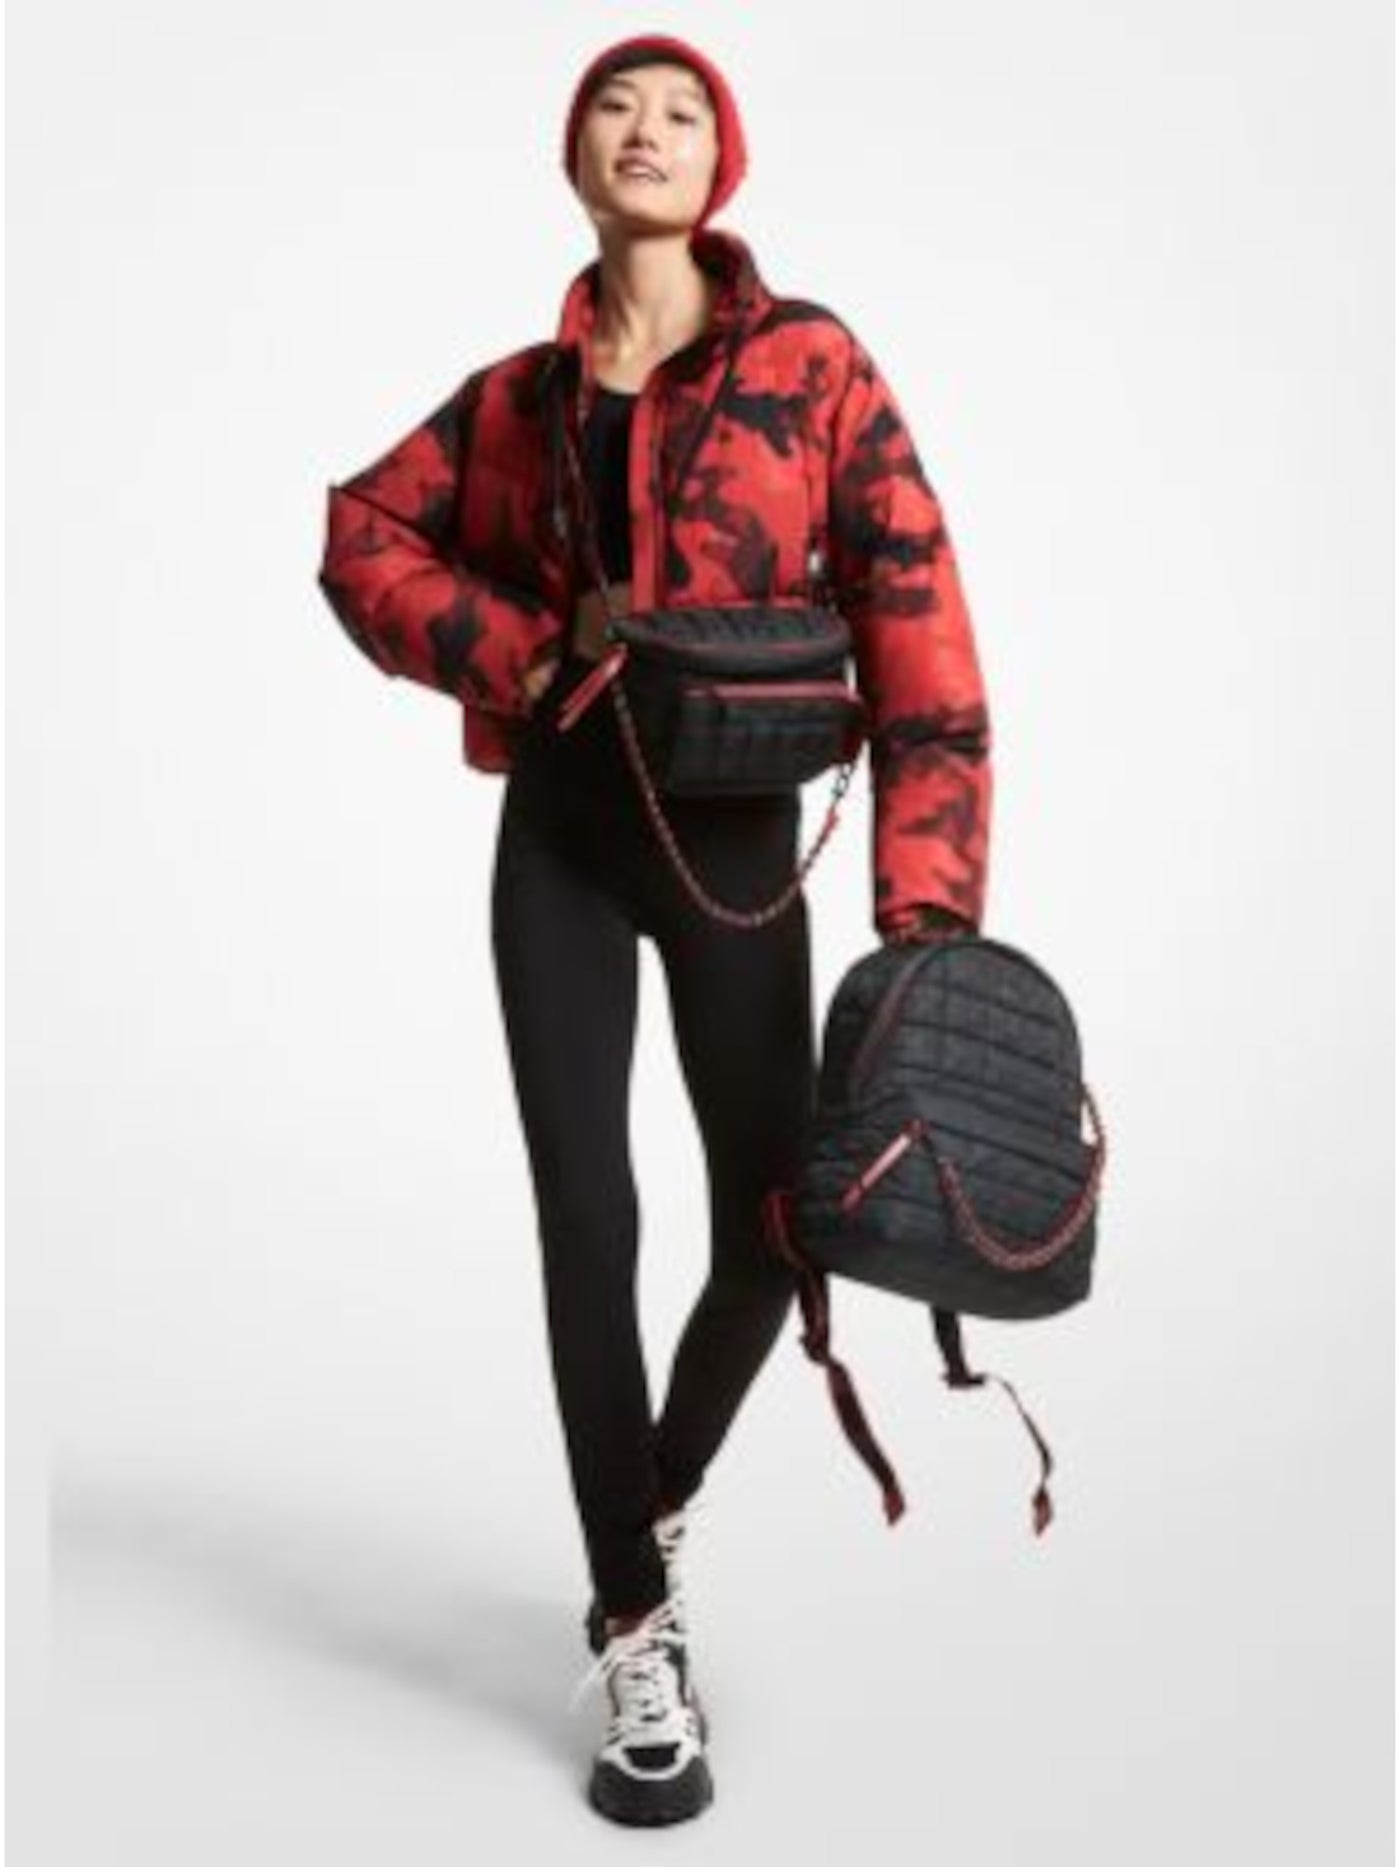 MICHAEL MICHAEL KORS Womens Red Zippered Pocketed Mock Neck Drawstring Cinched Hem Printed Puffer Jacket XS